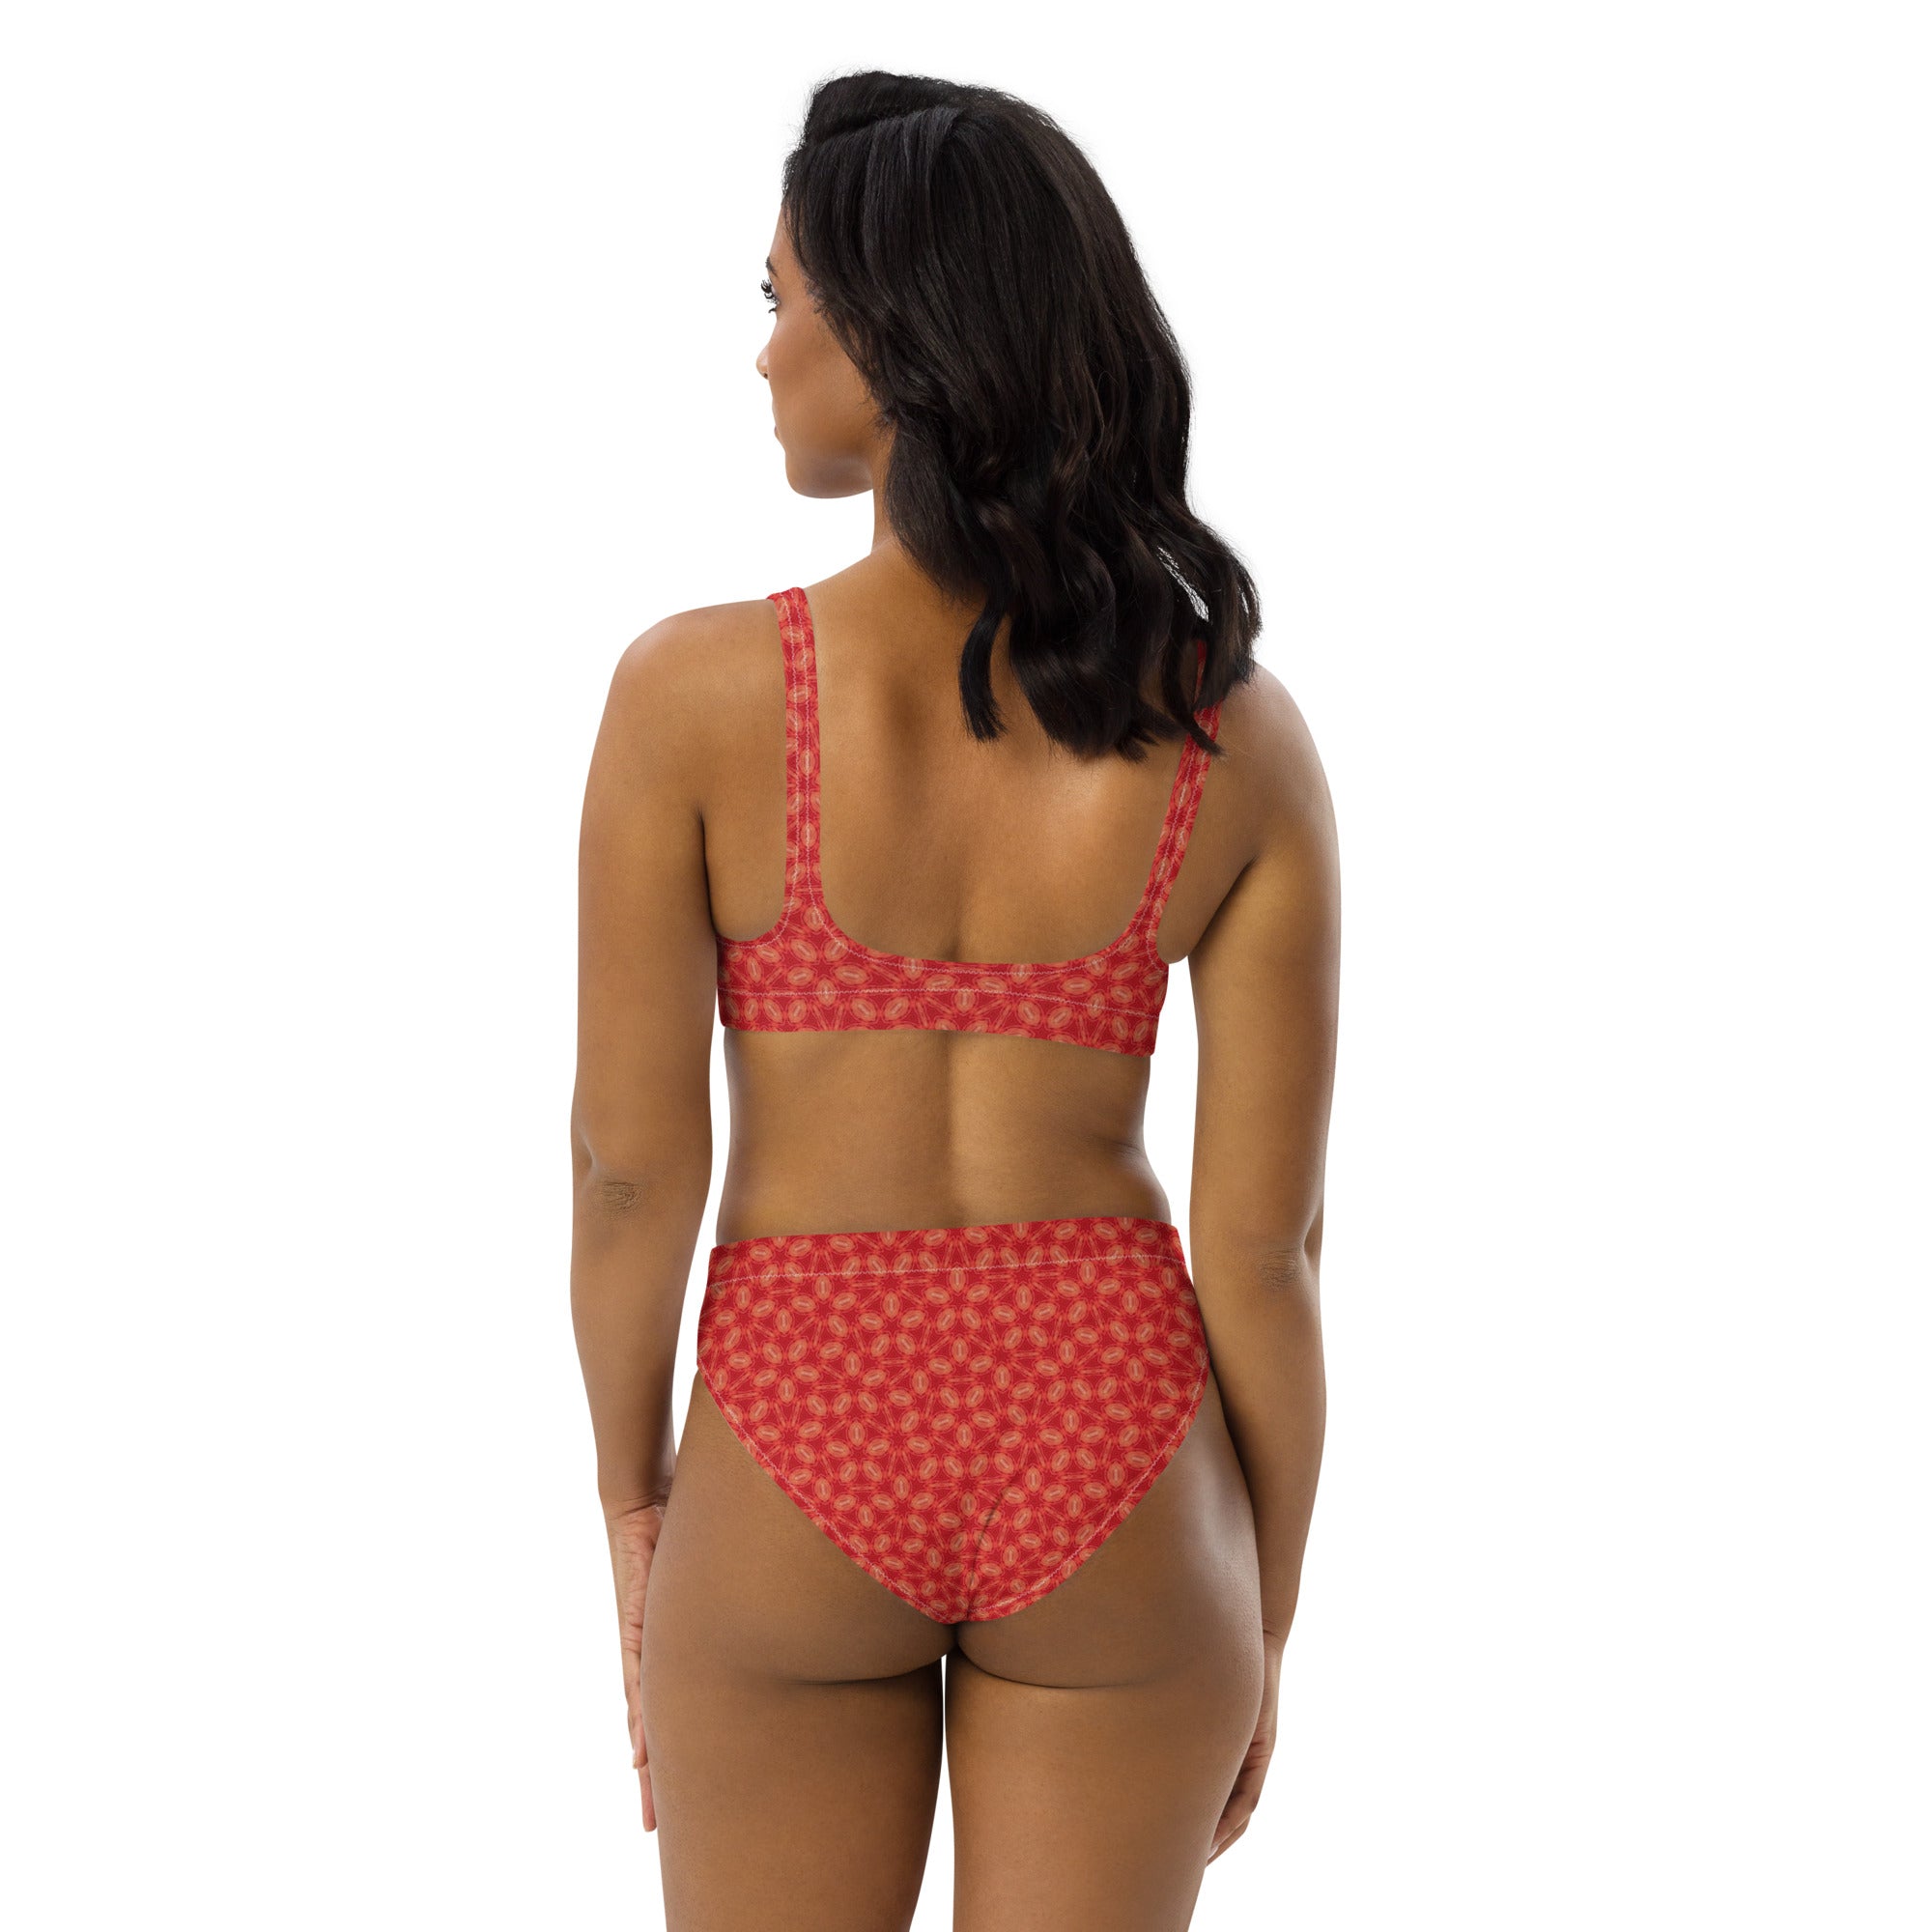 Happy Red Buttercup, Recycled high-waisted bikini, by Sensus Studio Design